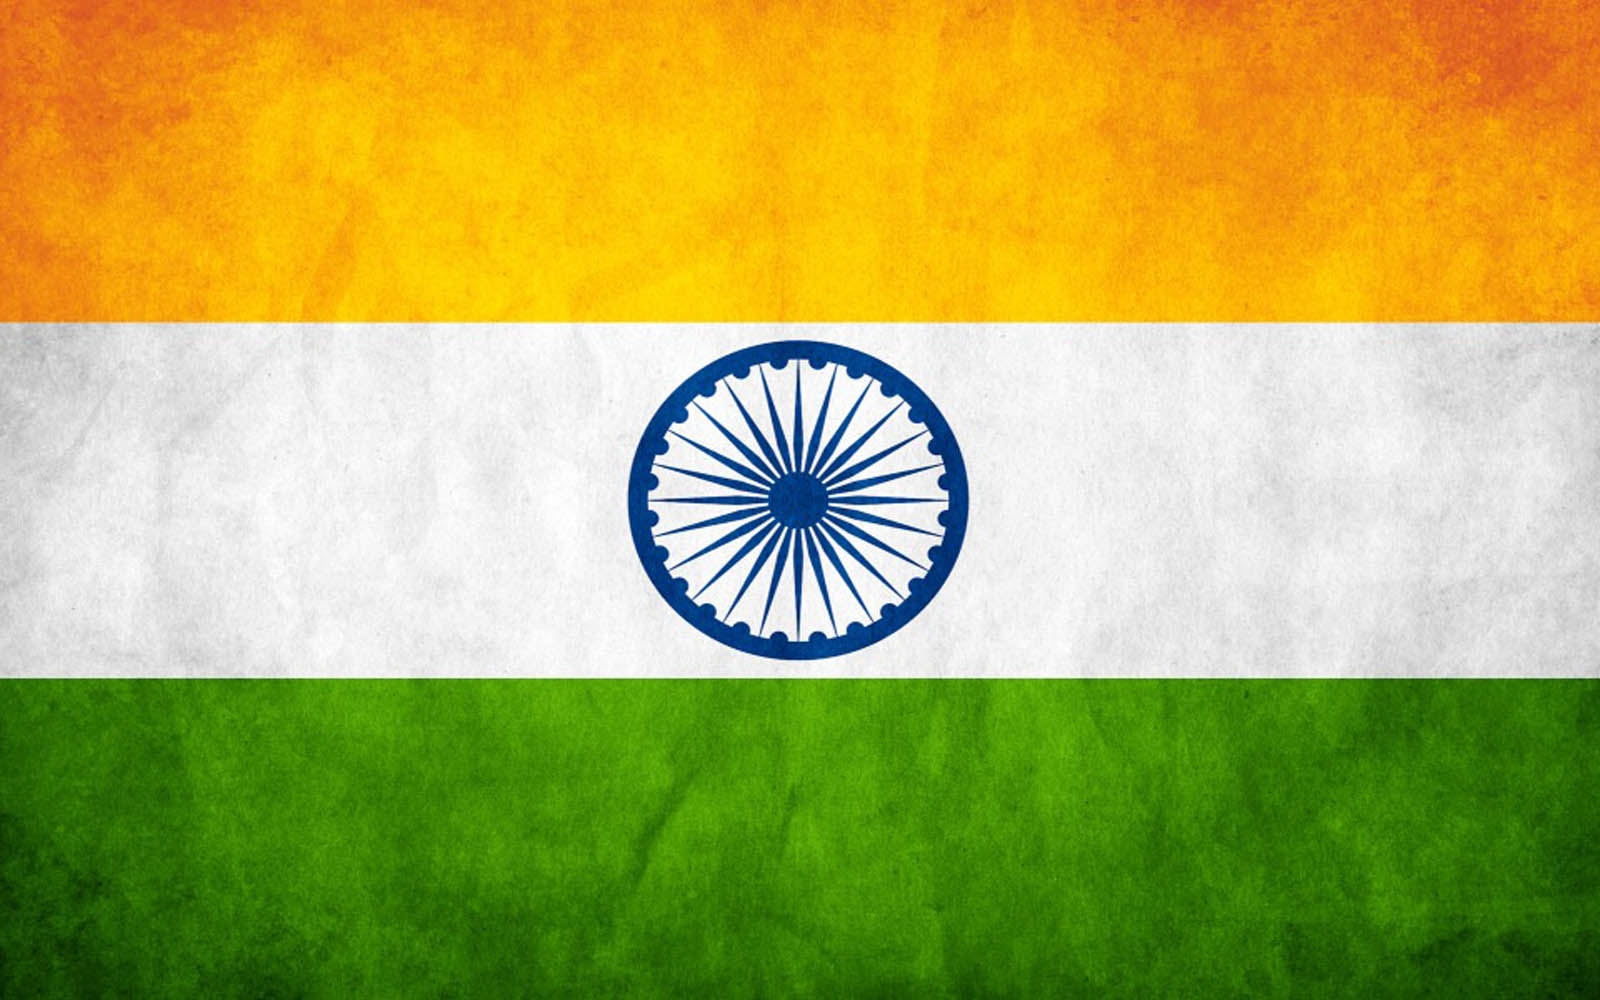 Indian Flag Photos 2013 Wallpapers Coloring Wallpapers Download Free Images Wallpaper [coloring365.blogspot.com]